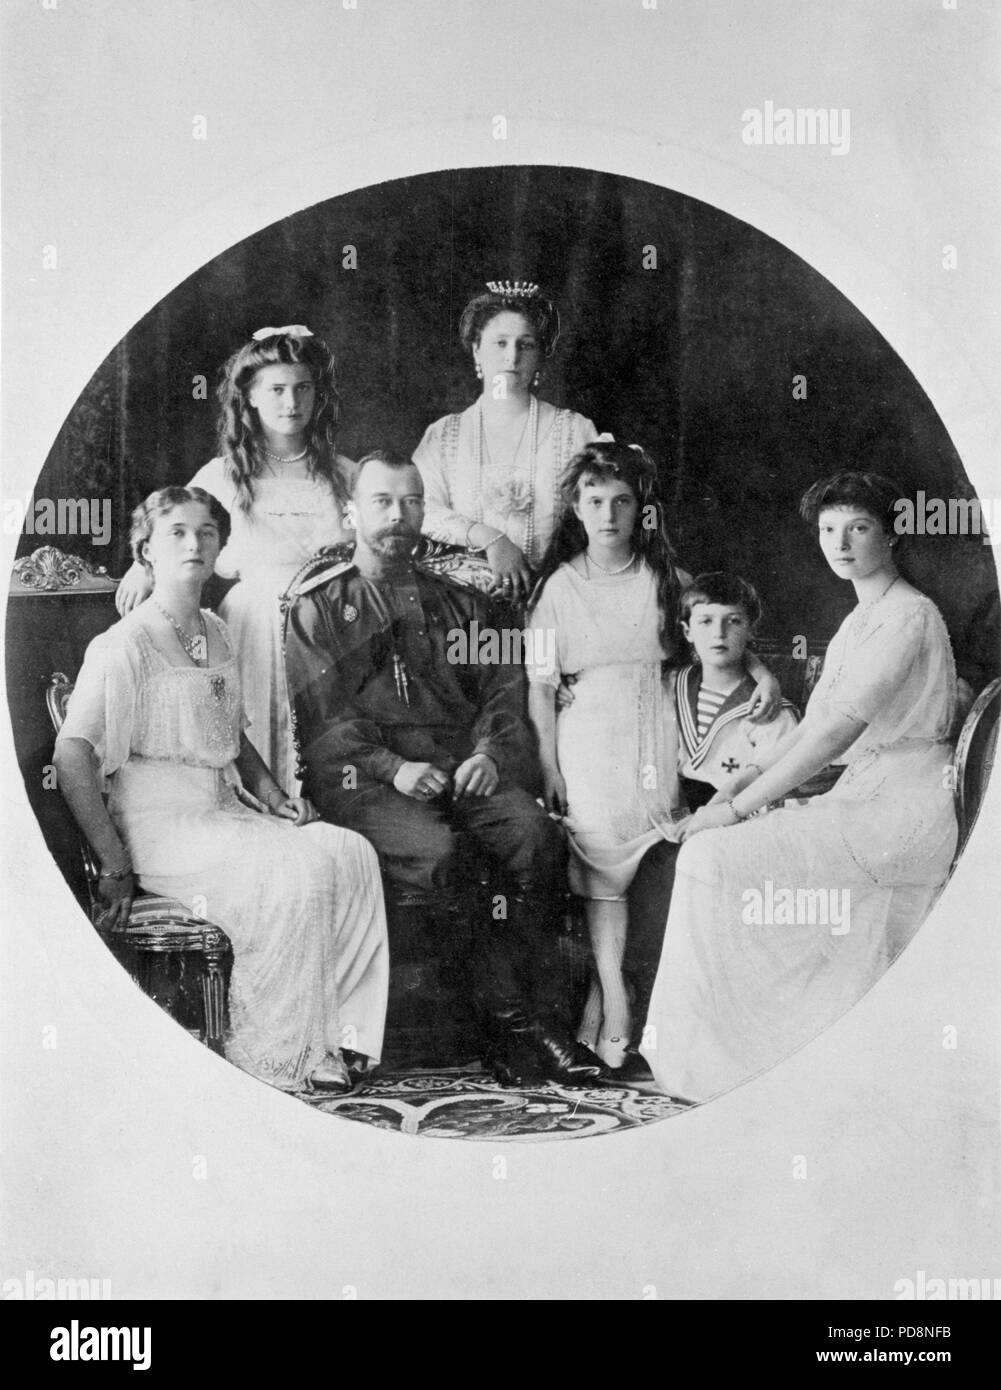 Tsar Nicholas II of Russia. 1868-1918. The last emperor of Russia. Pictured here together with his wife Alexandra and his five children Tatiana, Anastasia, Alexei, Maria and Olga. Stock Photo